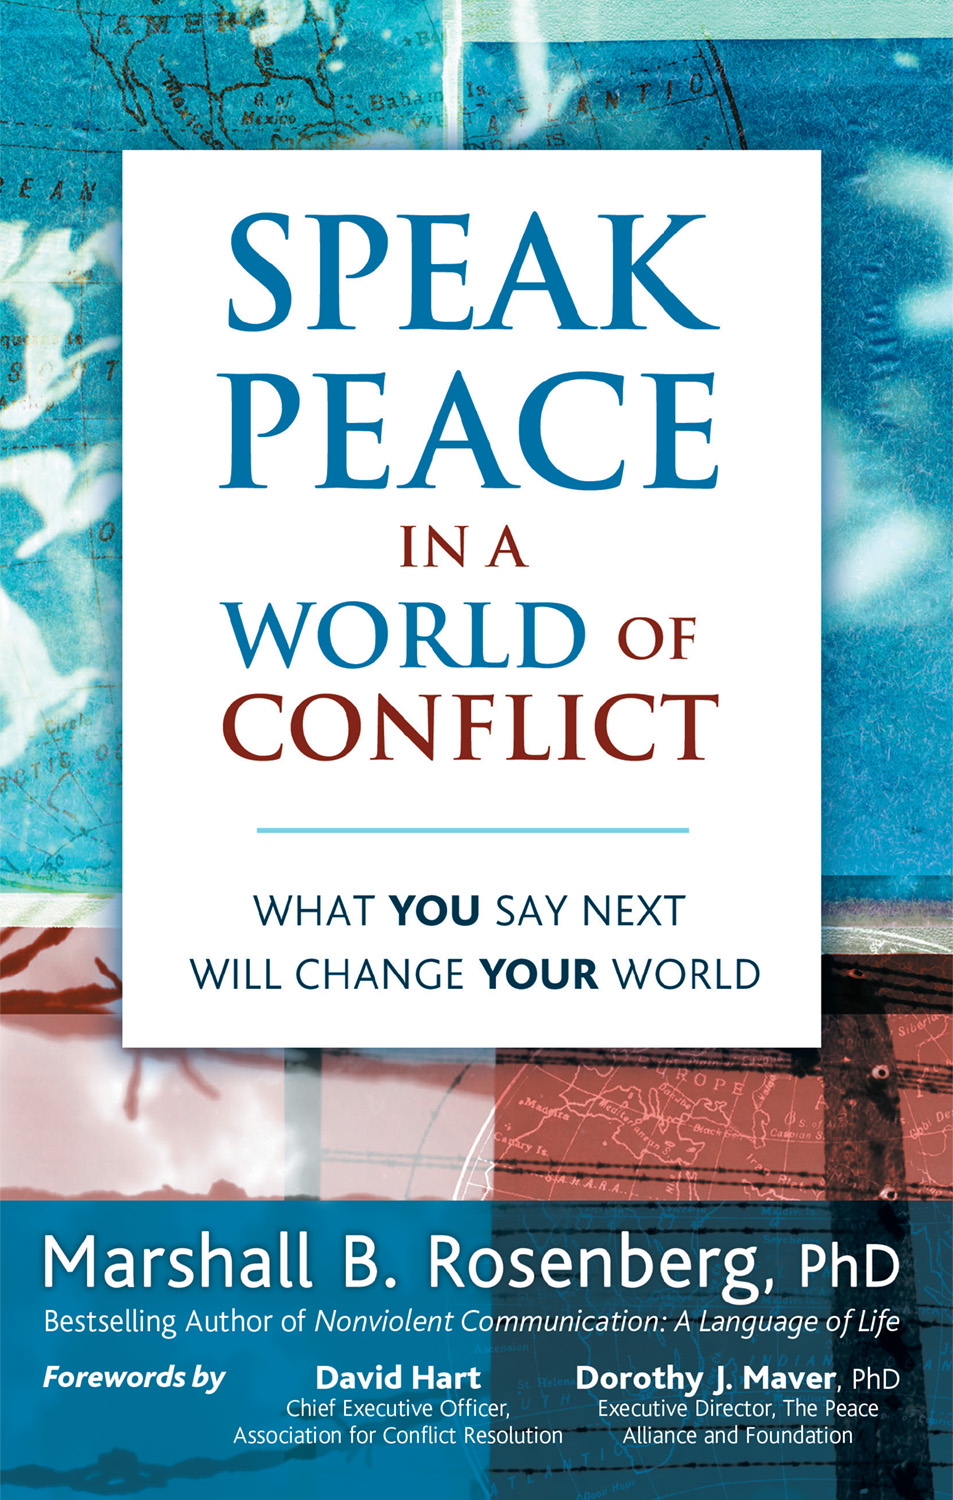 in global politics what is your opinion about peace and conflict